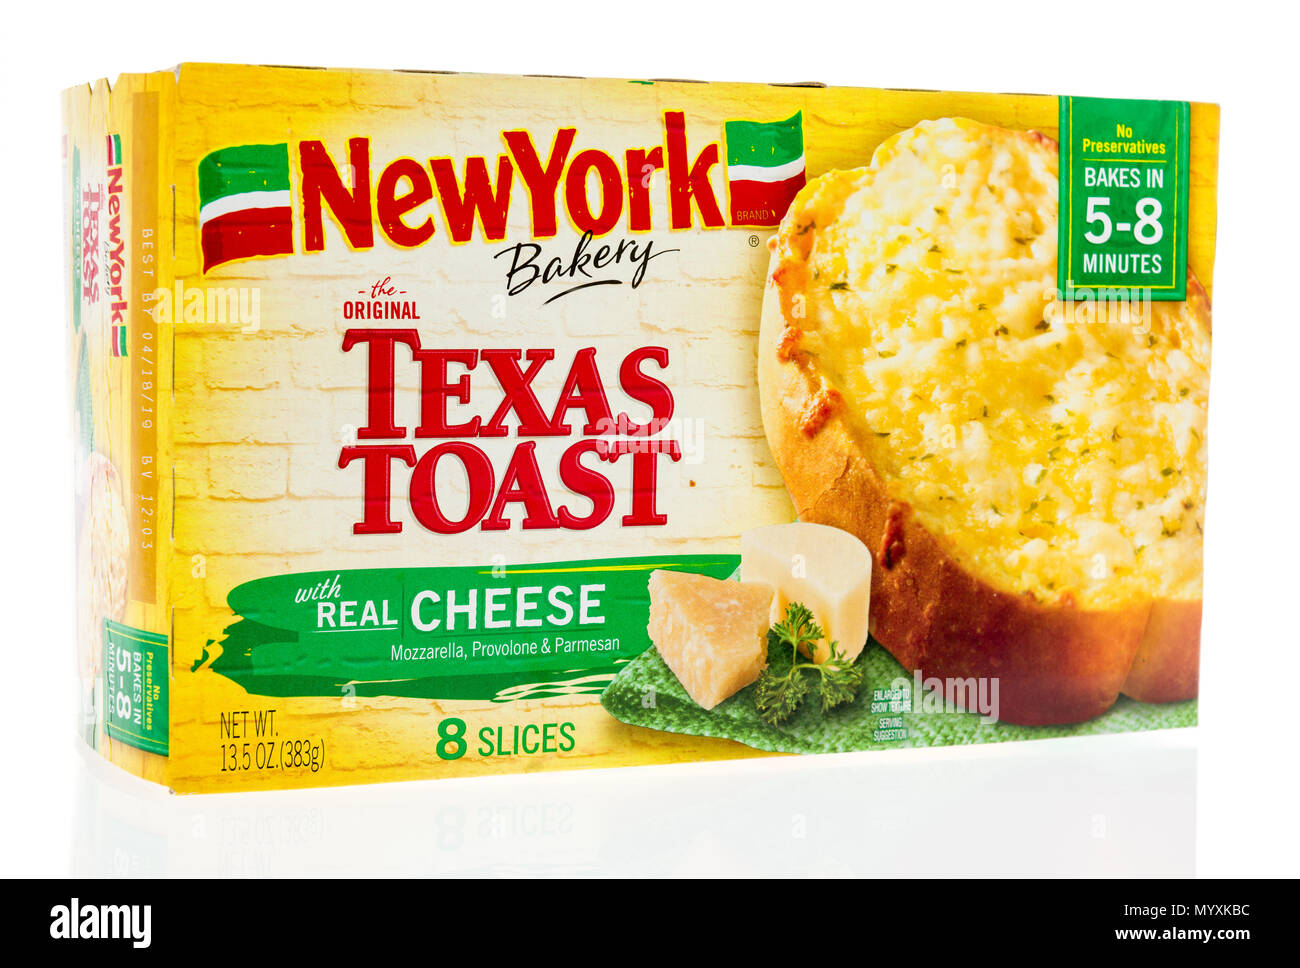 winneconne-1-june-2018-a-box-of-new-york-bakery-texas-toast-with-real-cheese-on-an-isolated